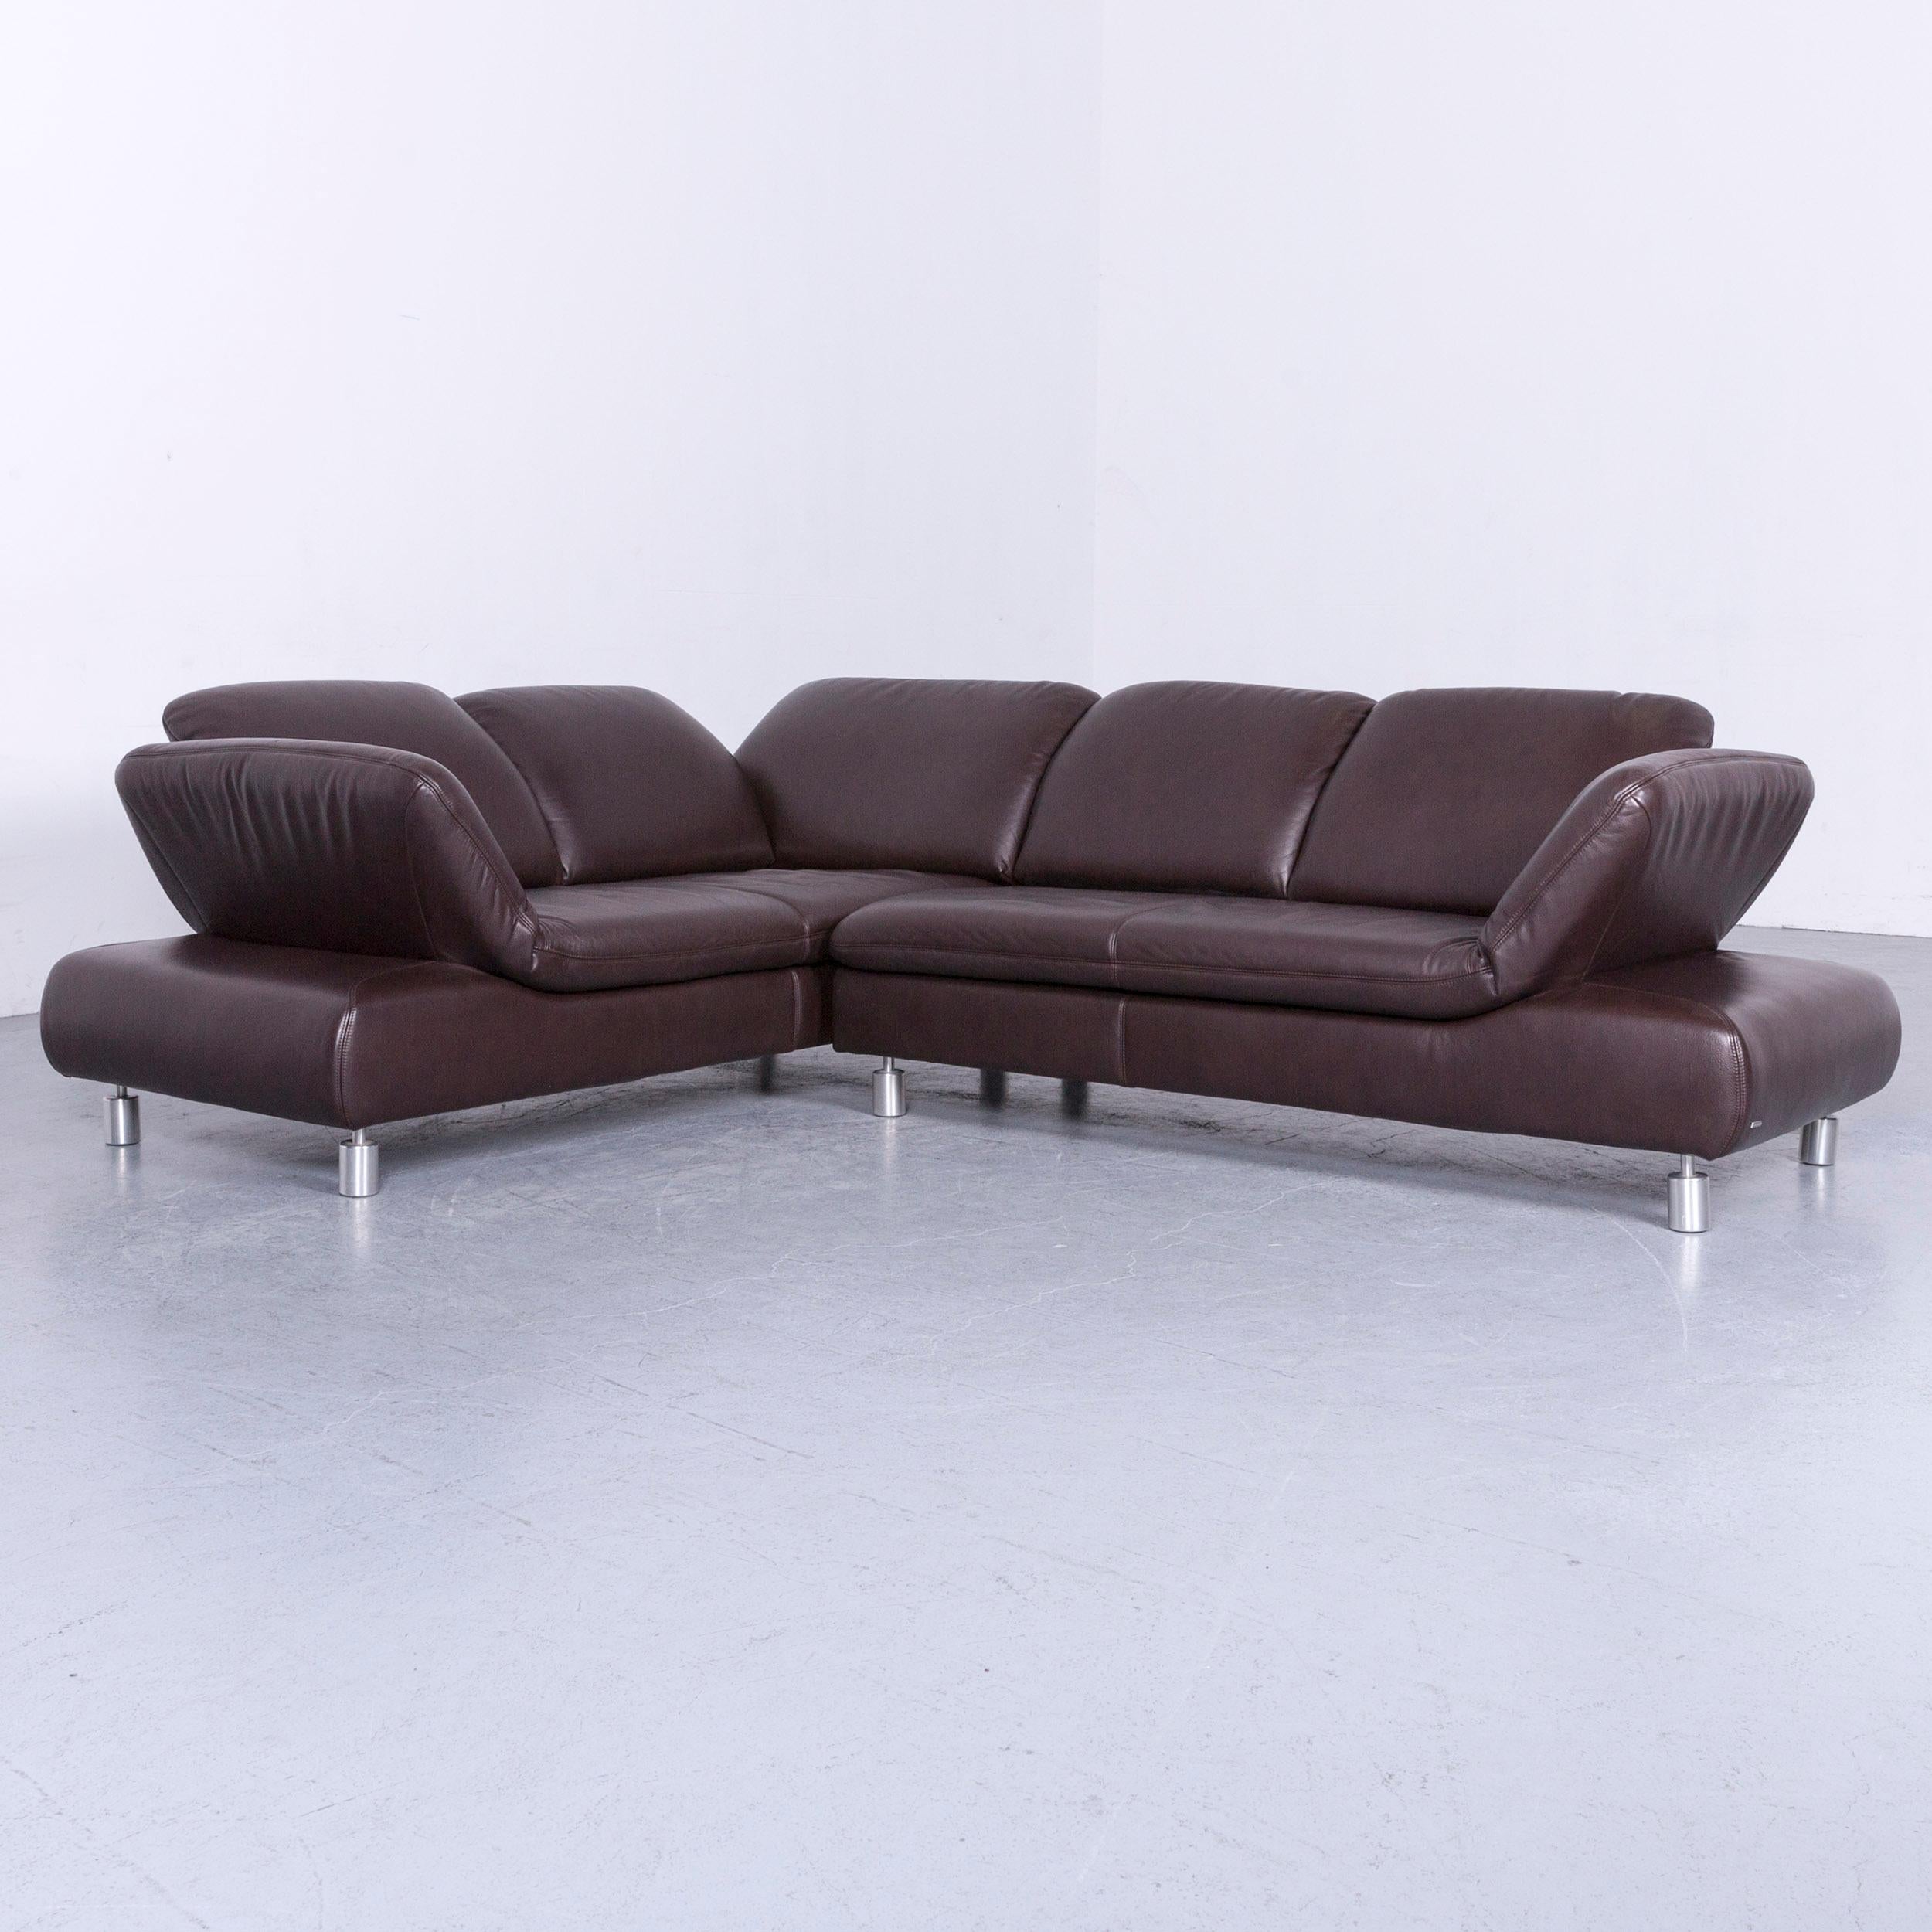 We bring to you an Koinor Rivoli designer leather corner sofa in brown with functions. 














